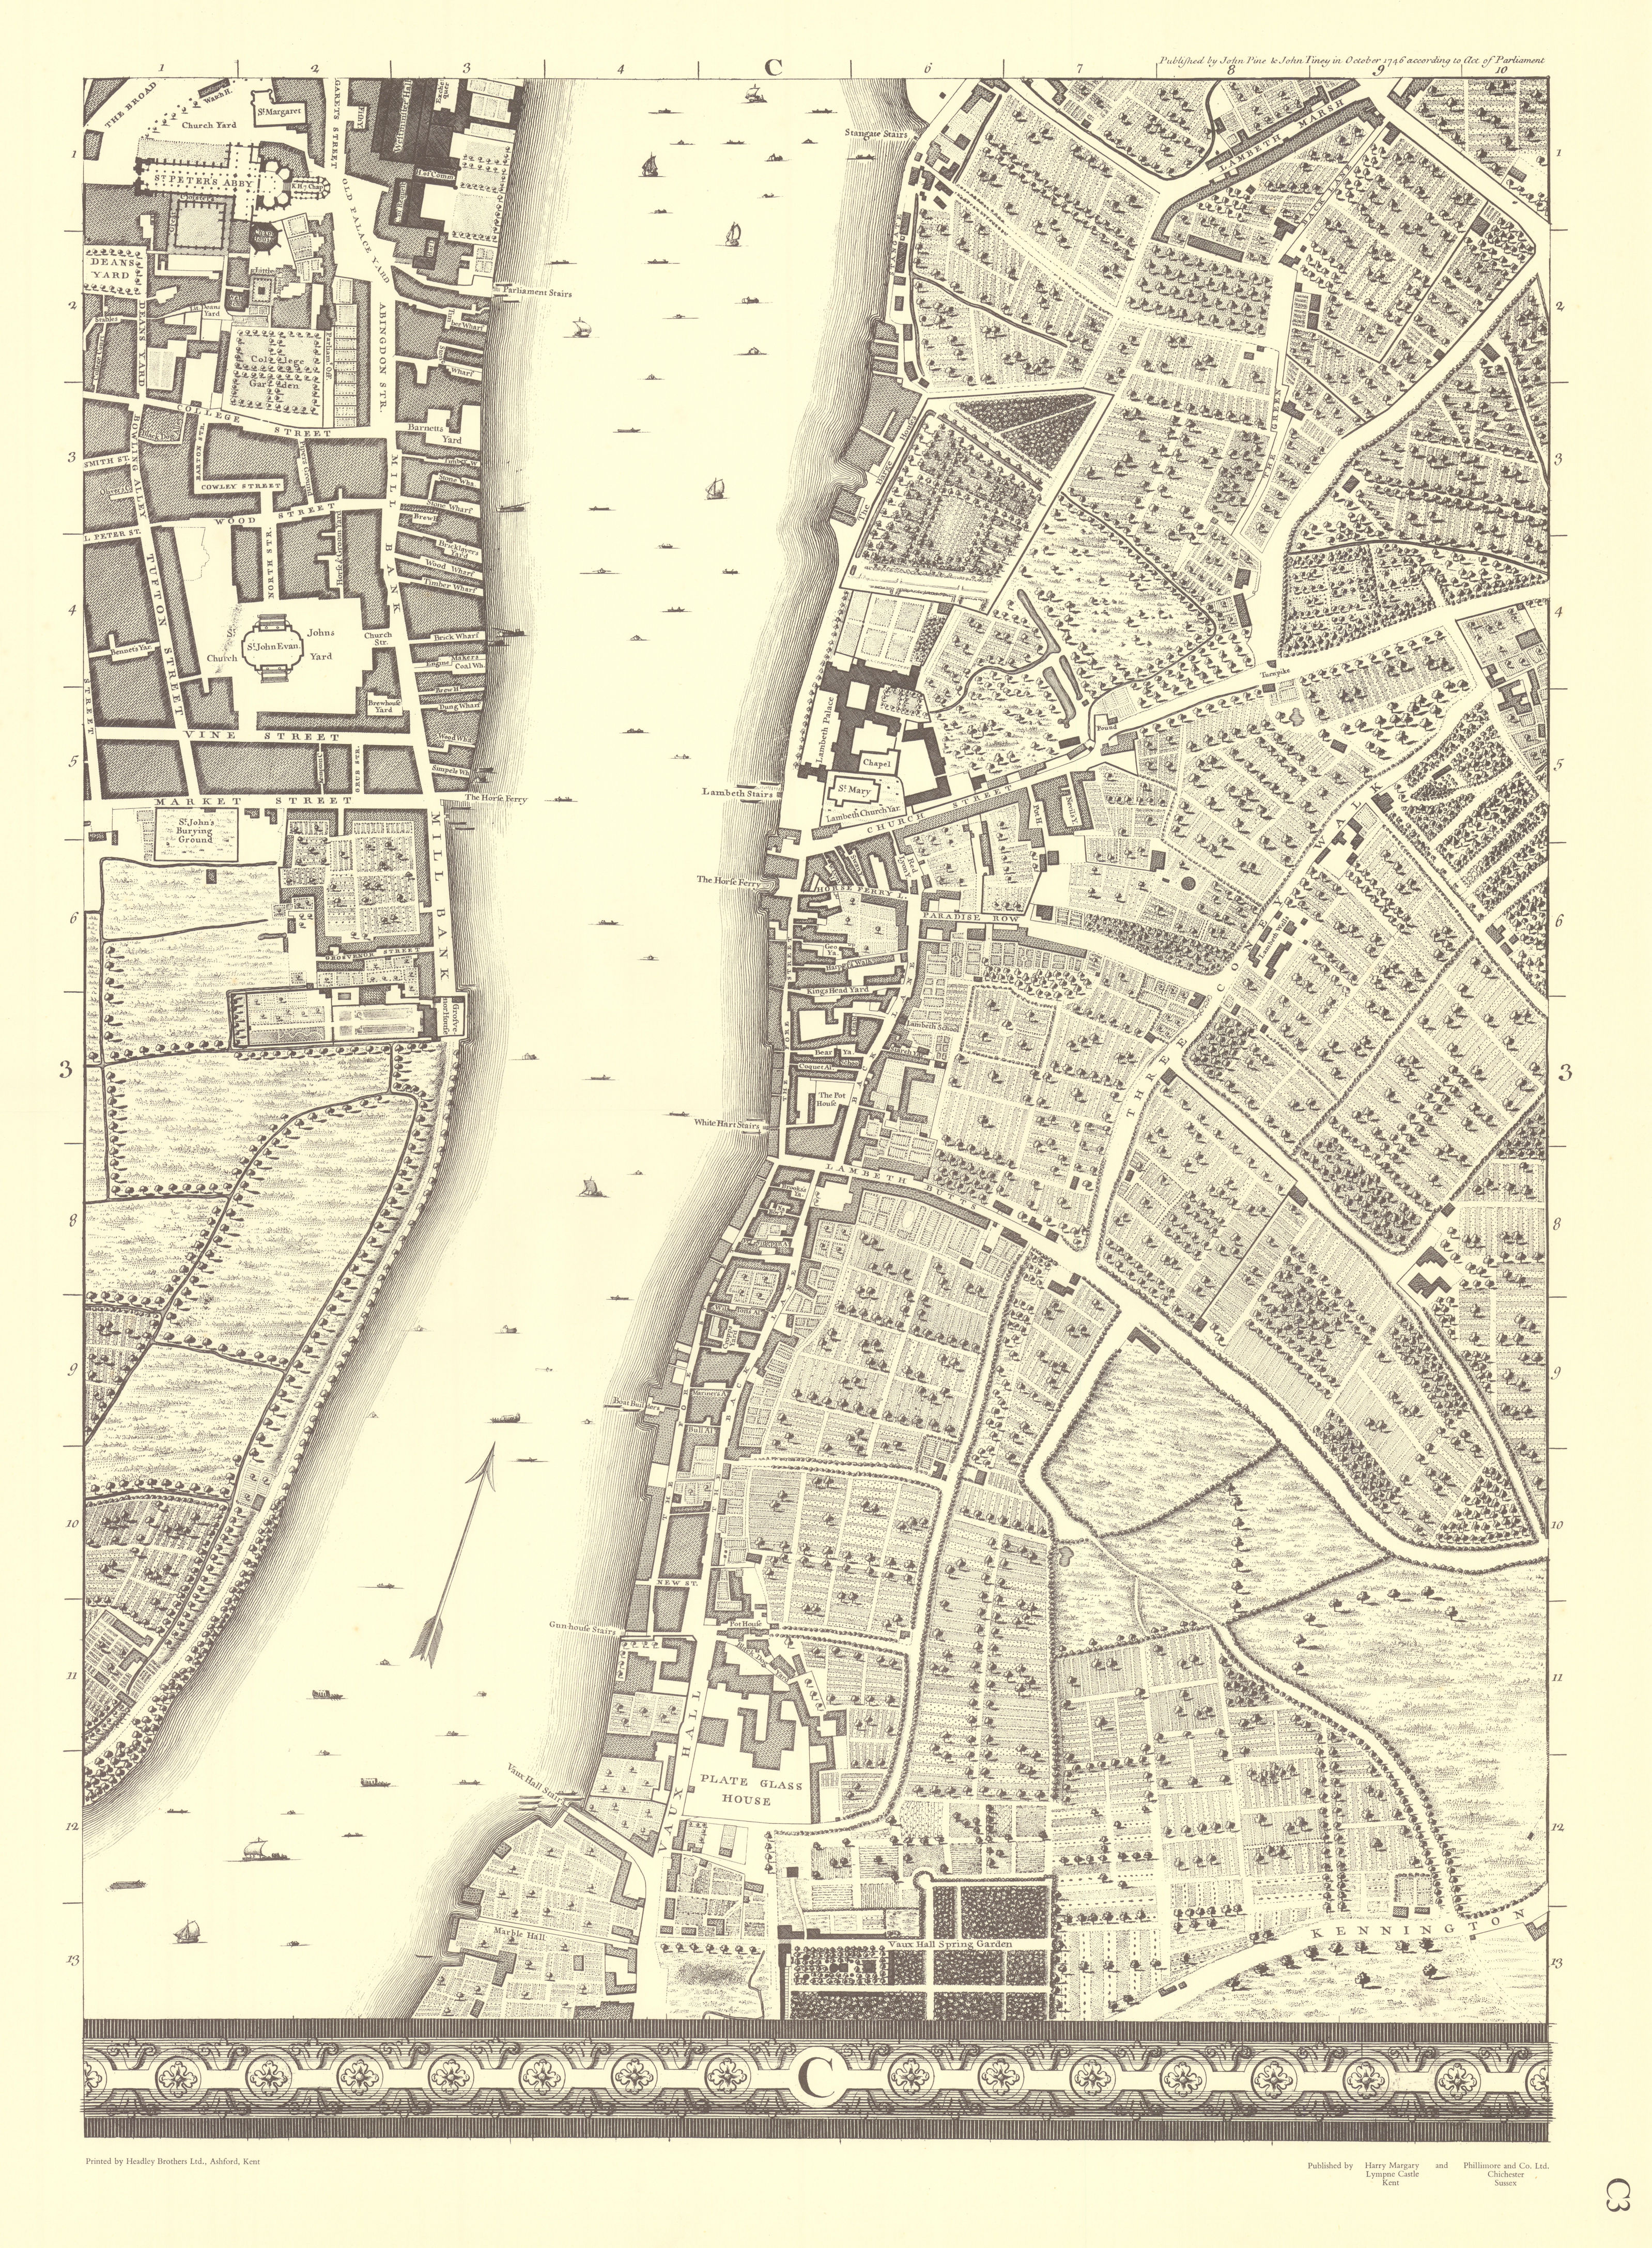 Westminster, Millbank, Vauxhall, Lambeth. Sheet C3. After ROCQUE 1971 (1746) map